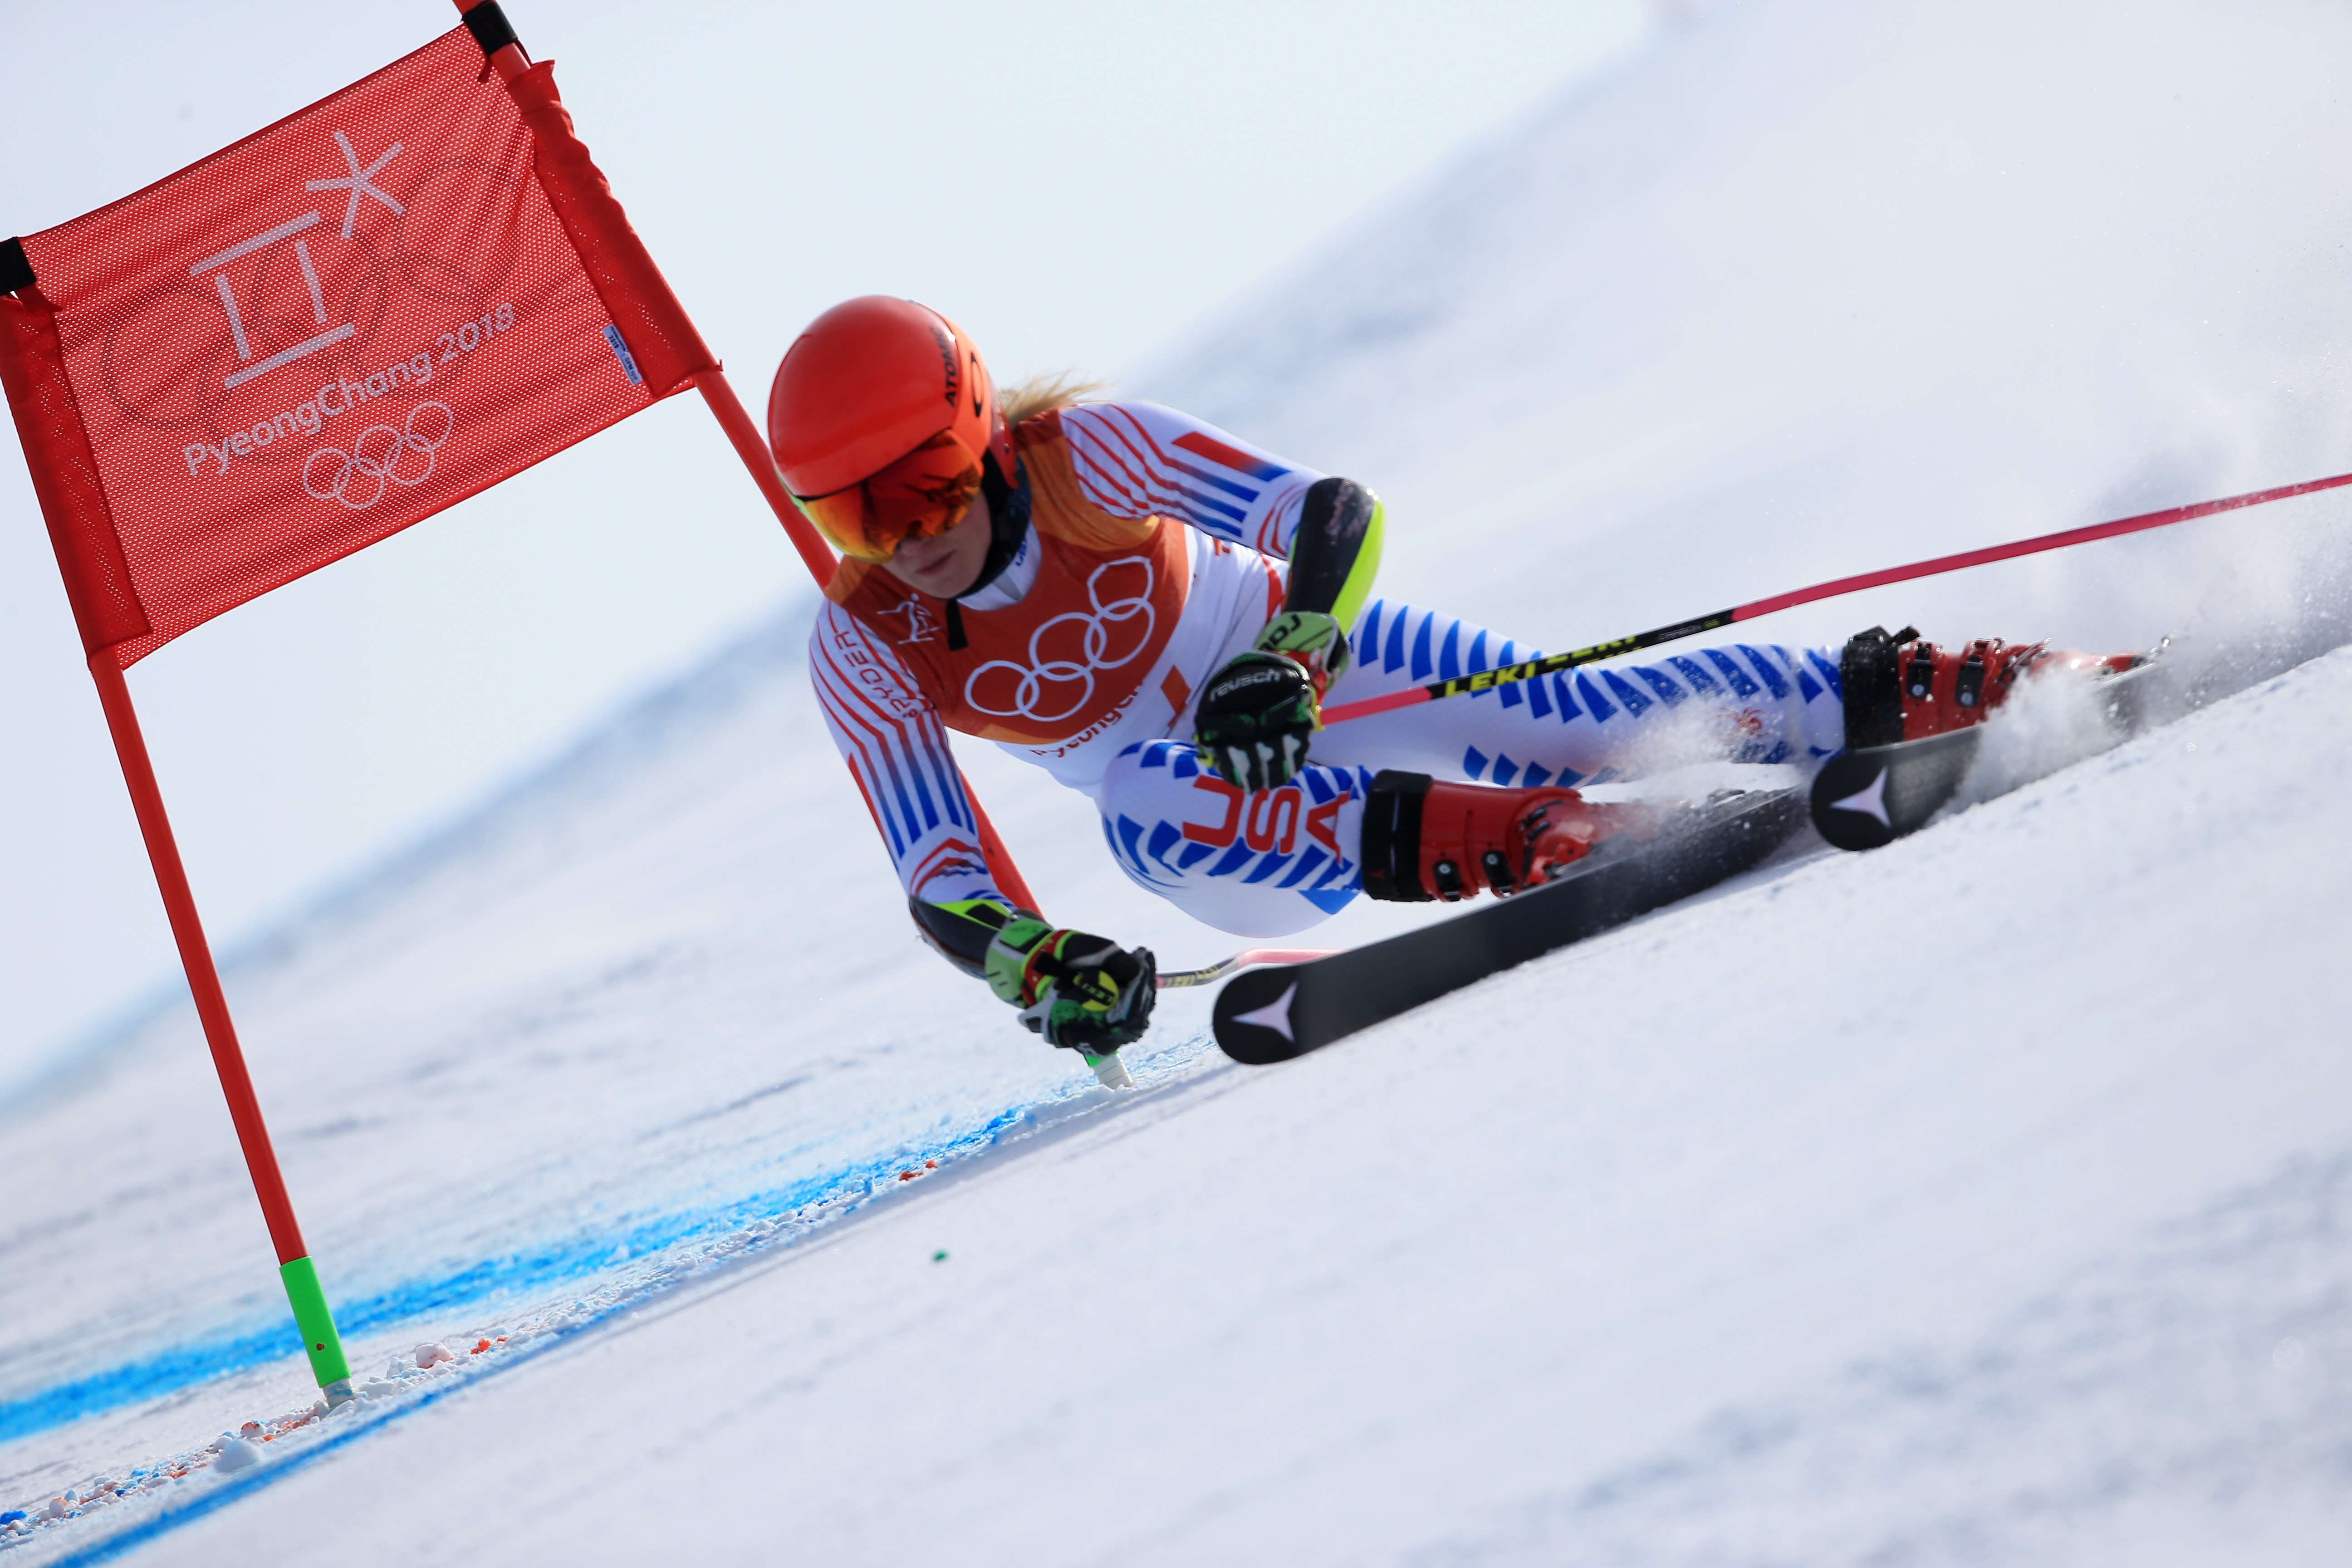 Alpine skiing at the 2018 olympic winter games event results Shiffrin Wins Giant Slalom Gold